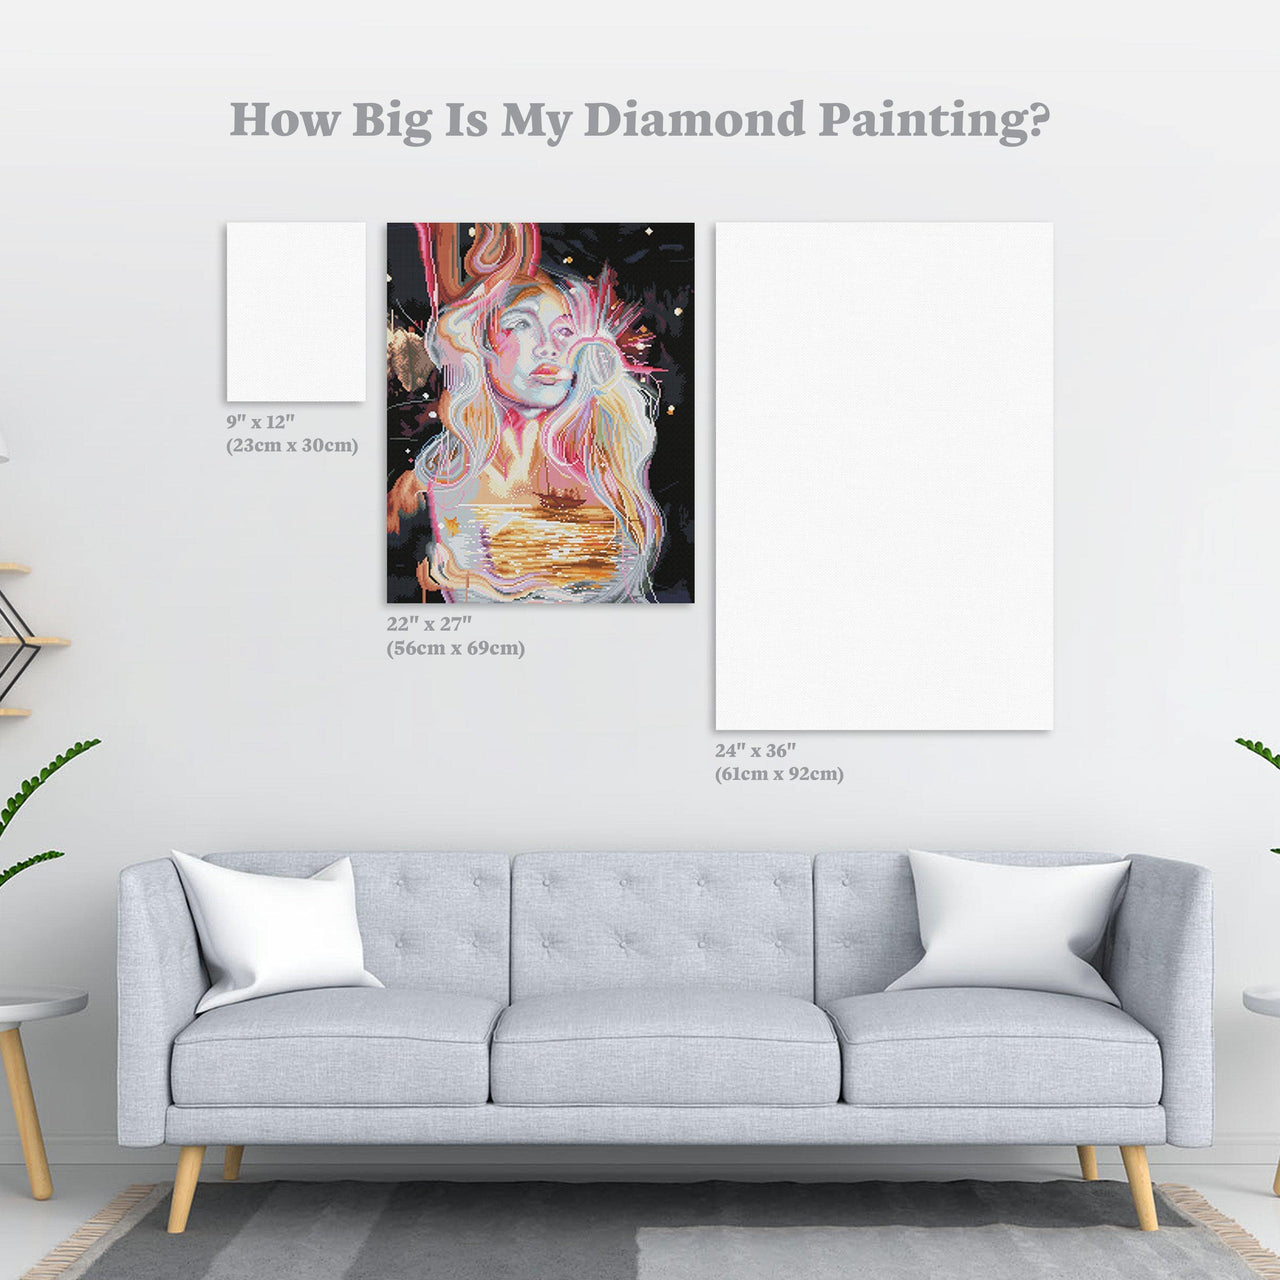 Diamond Painting Arrival 22" x 27″ (56cm x 69cm) / Round with 57 Colors including 4 ABs / 48,955